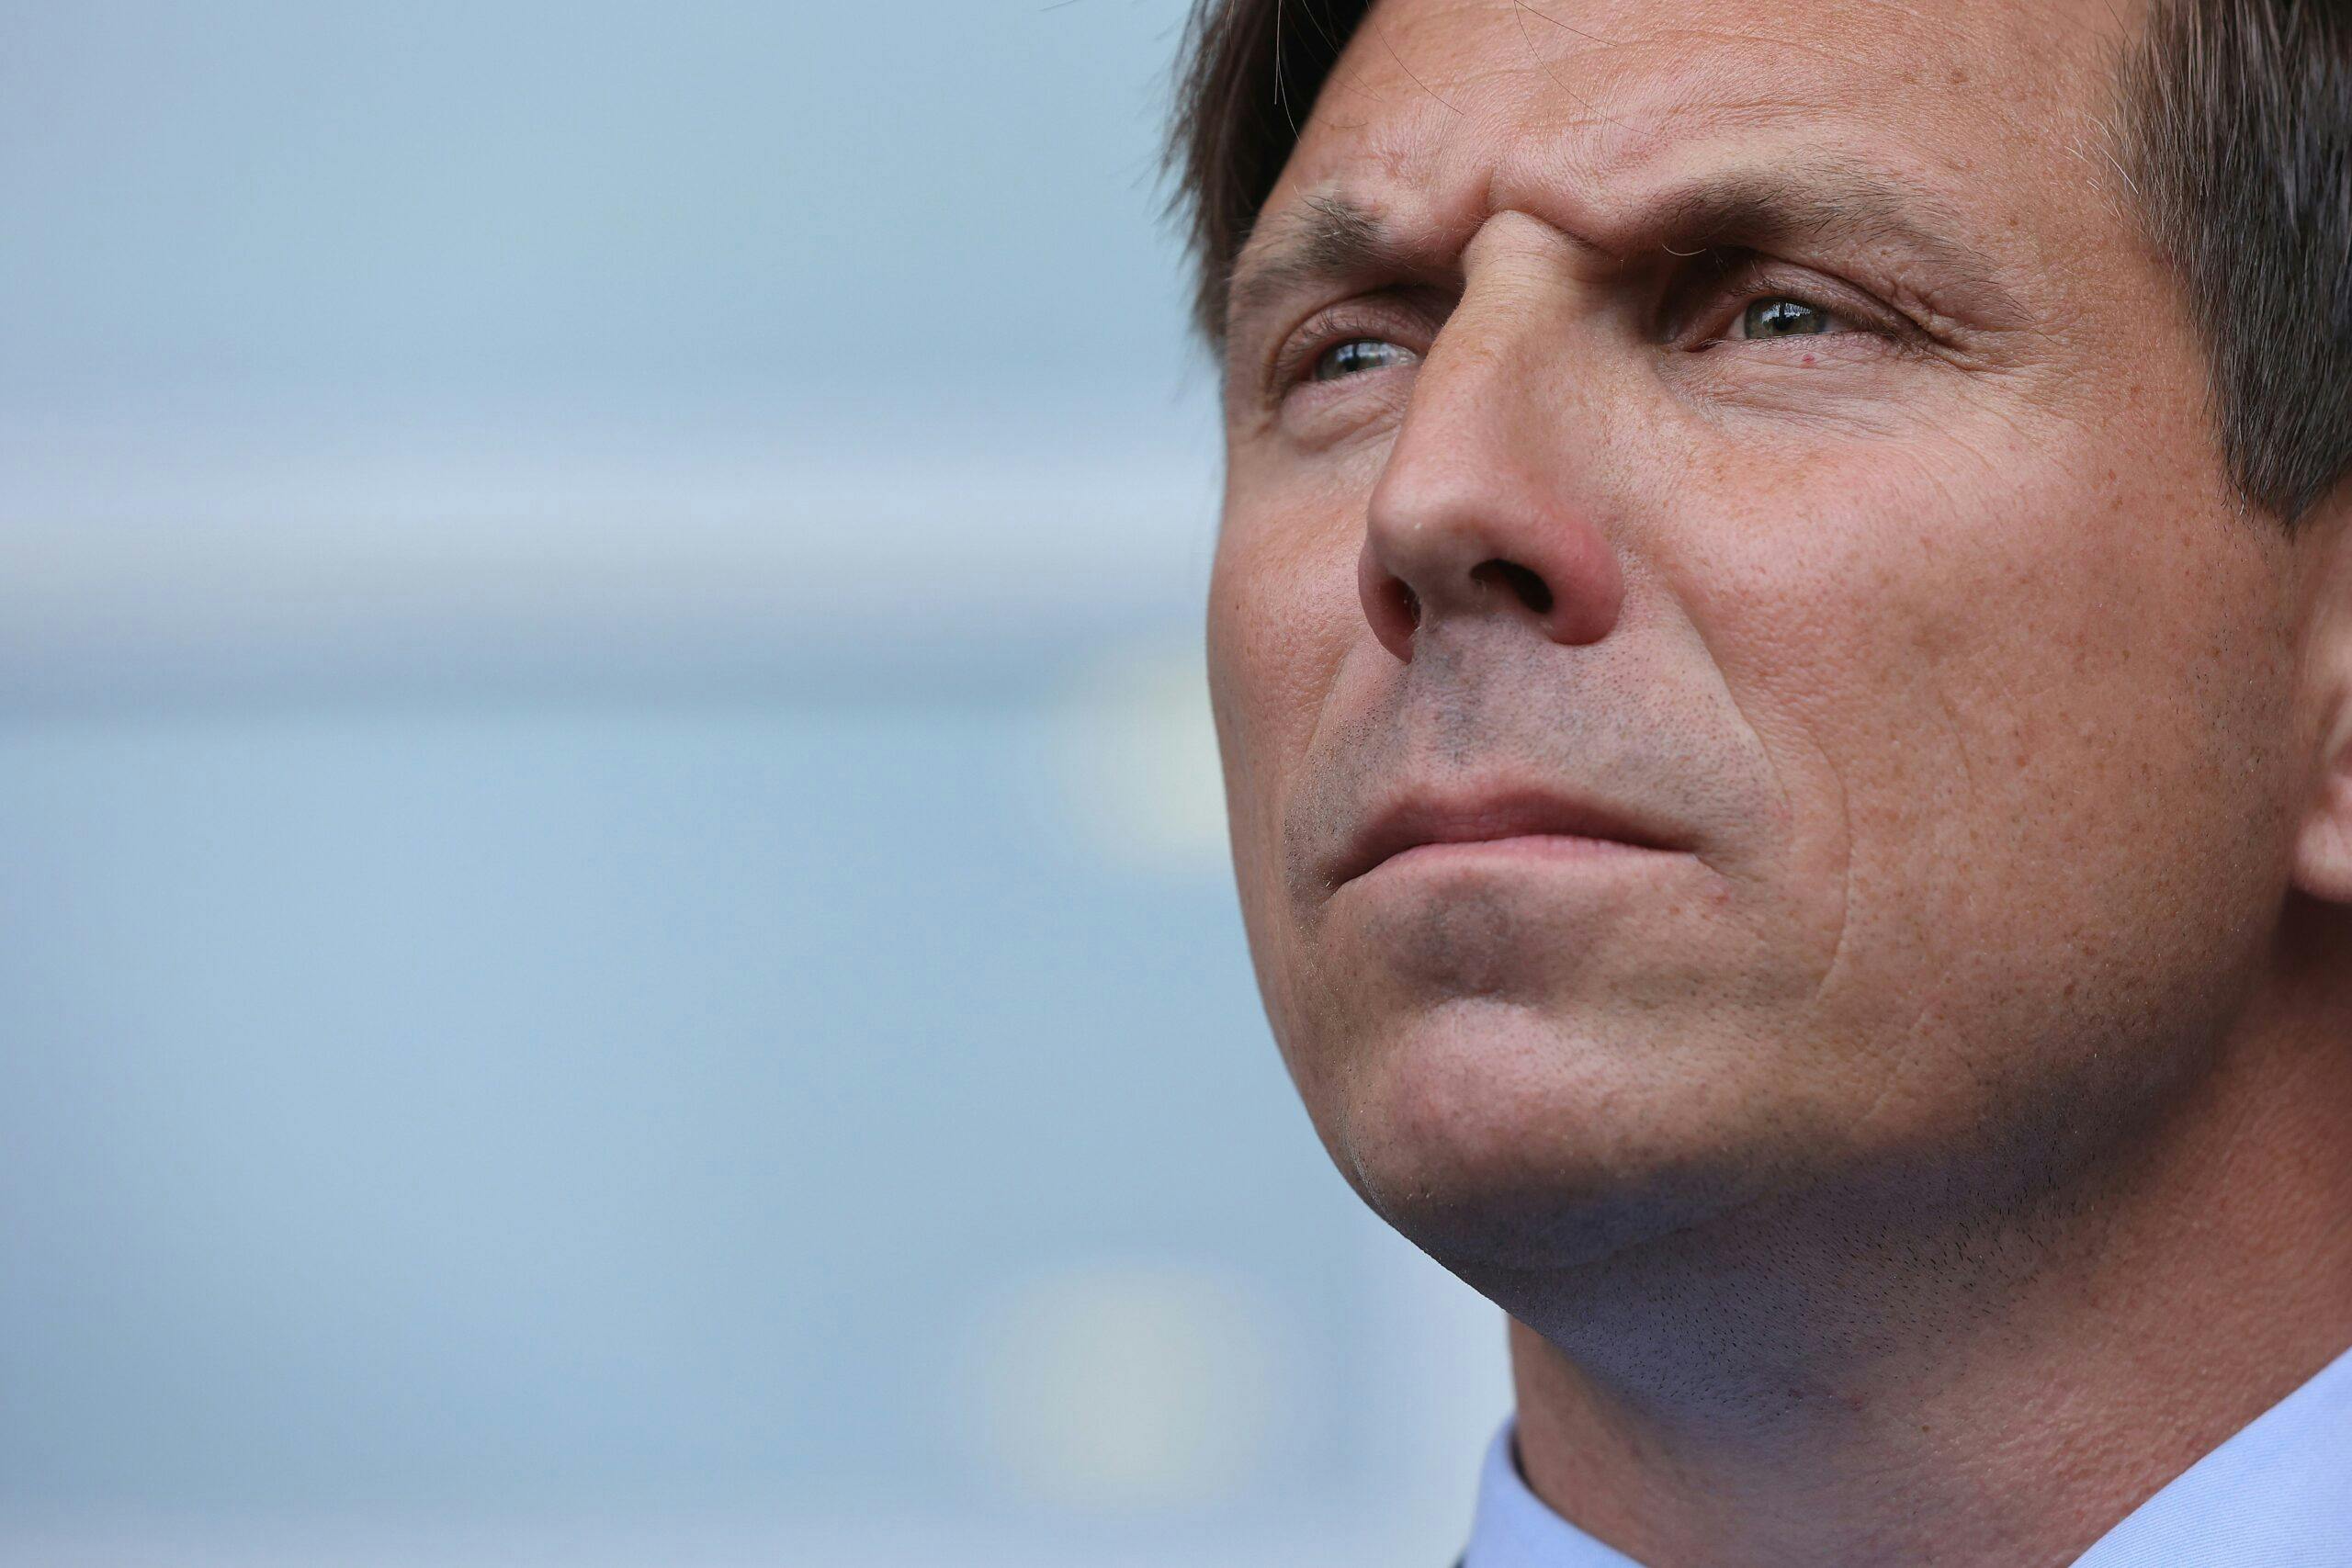 City coffers paid Patrick Brown’s lawyer $180,000, documents show